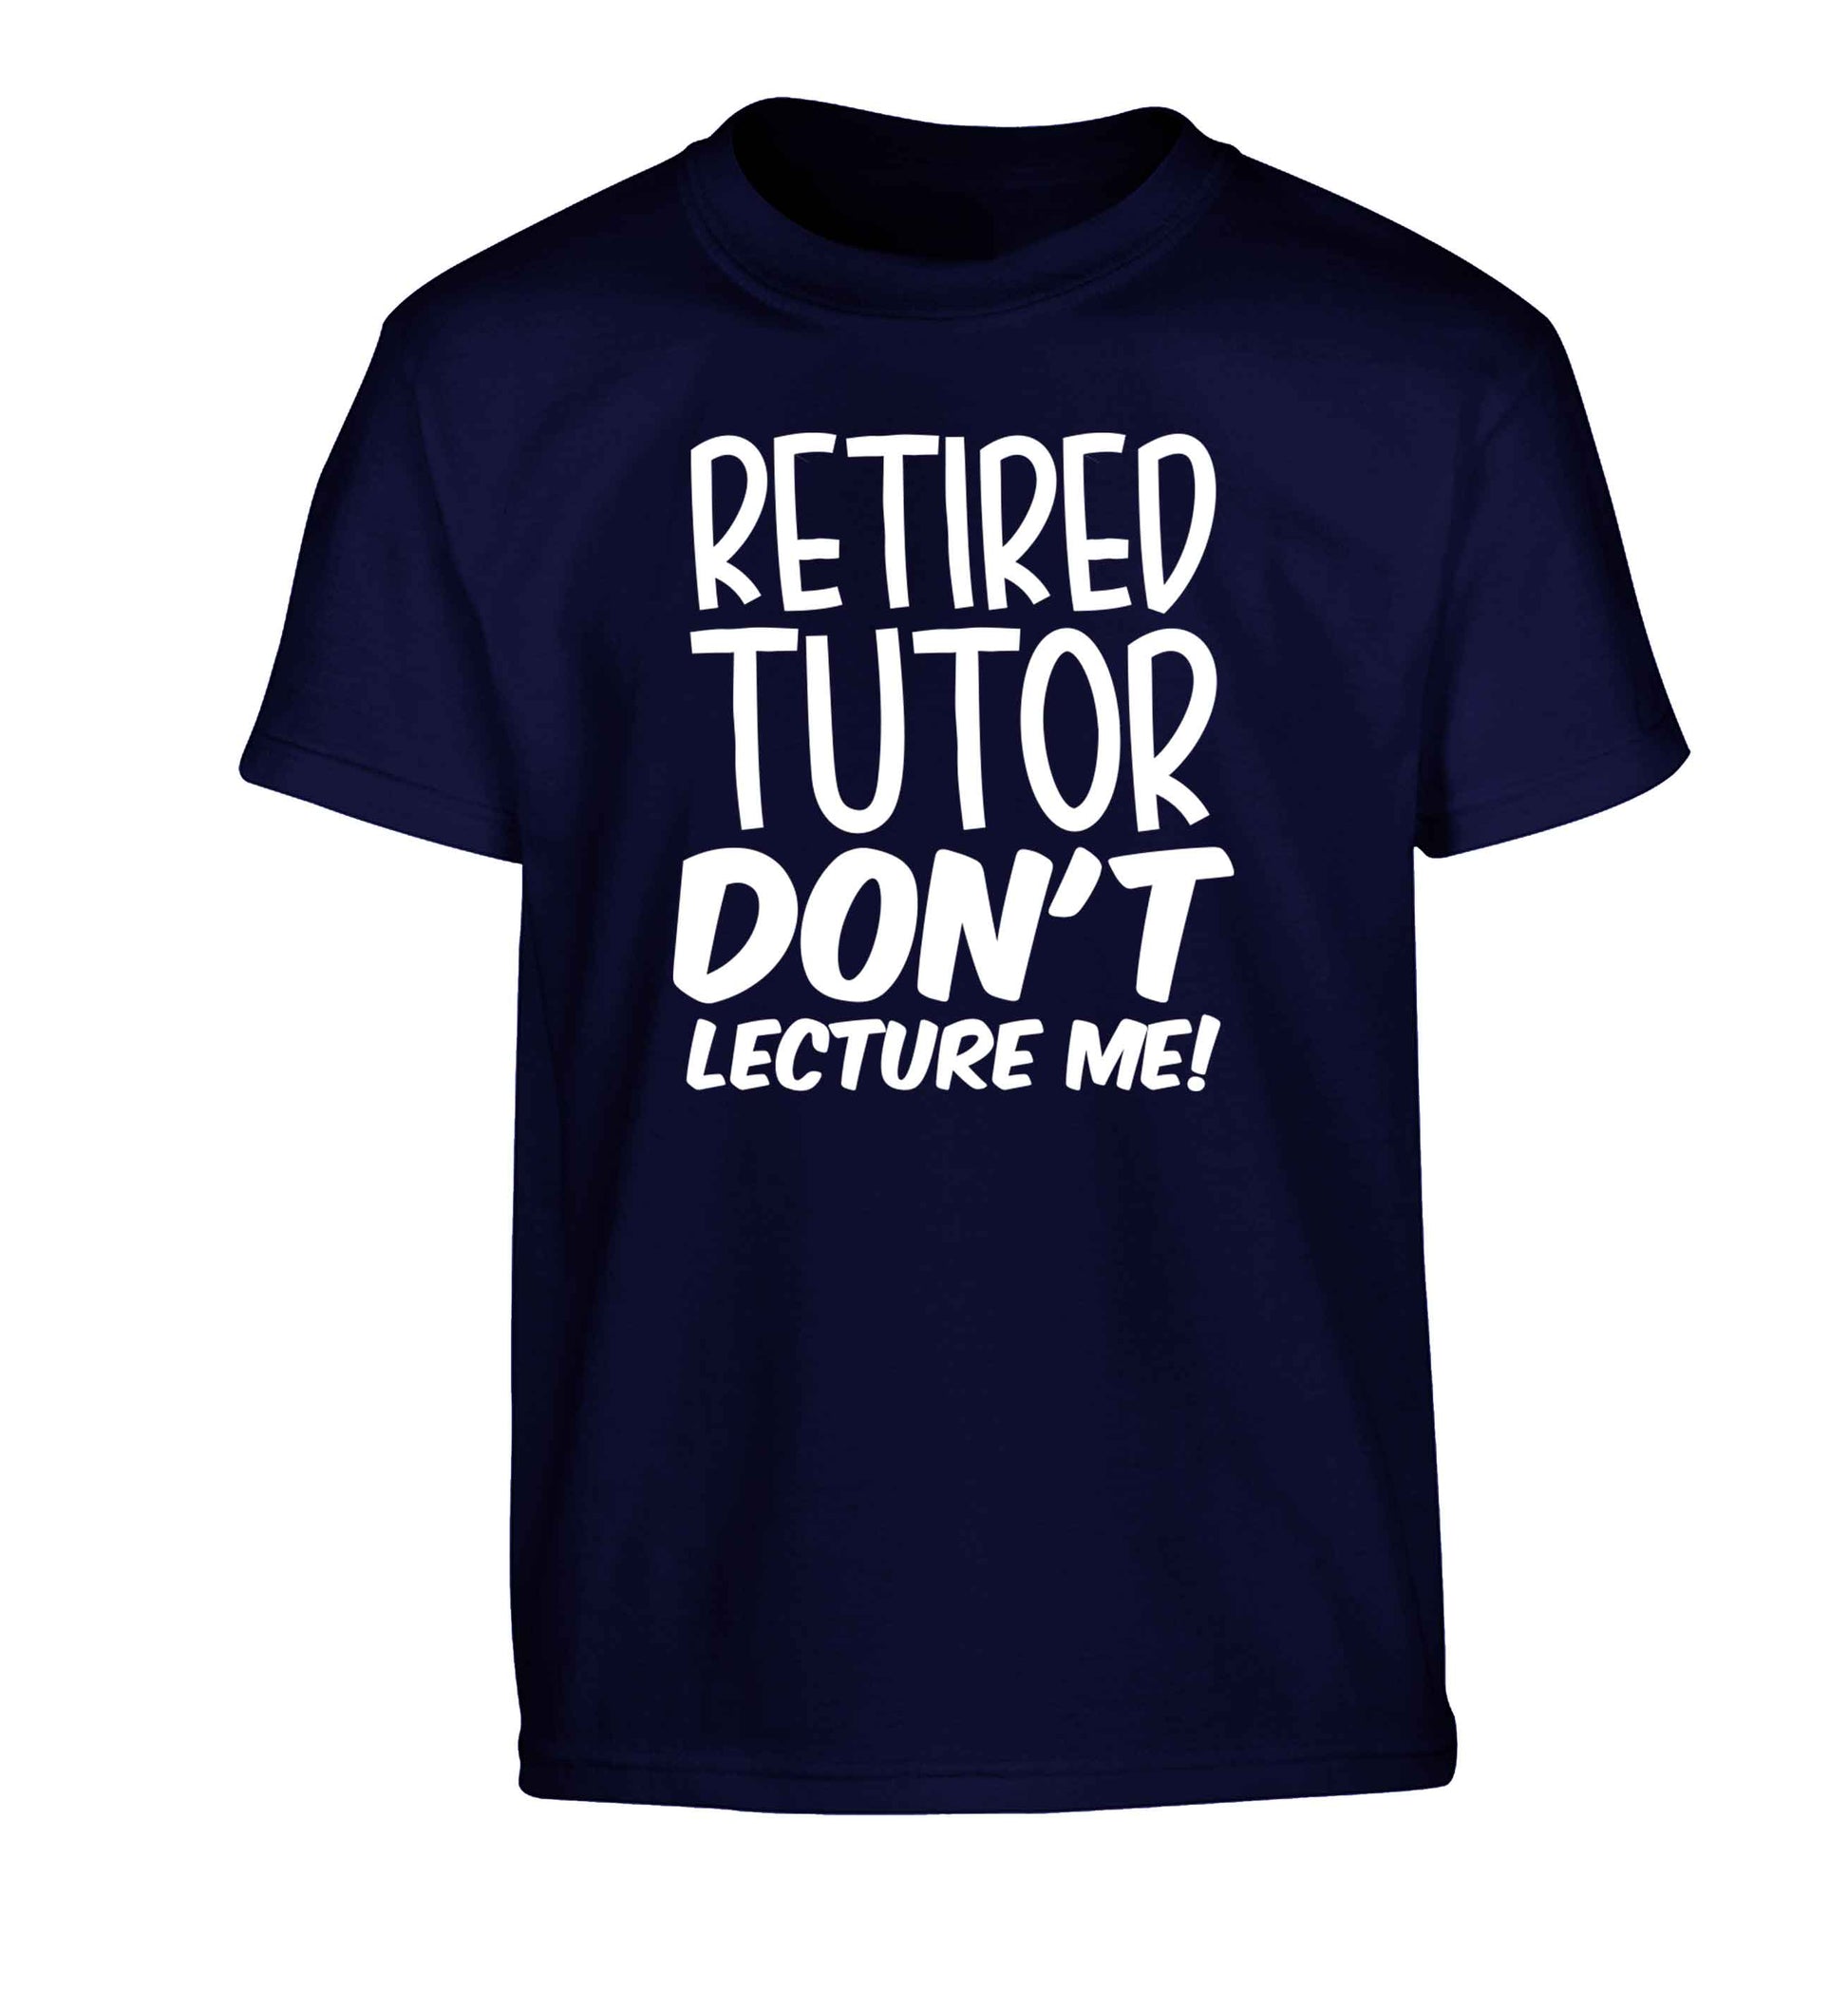 Retired tutor don't lecture me! Children's navy Tshirt 12-13 Years